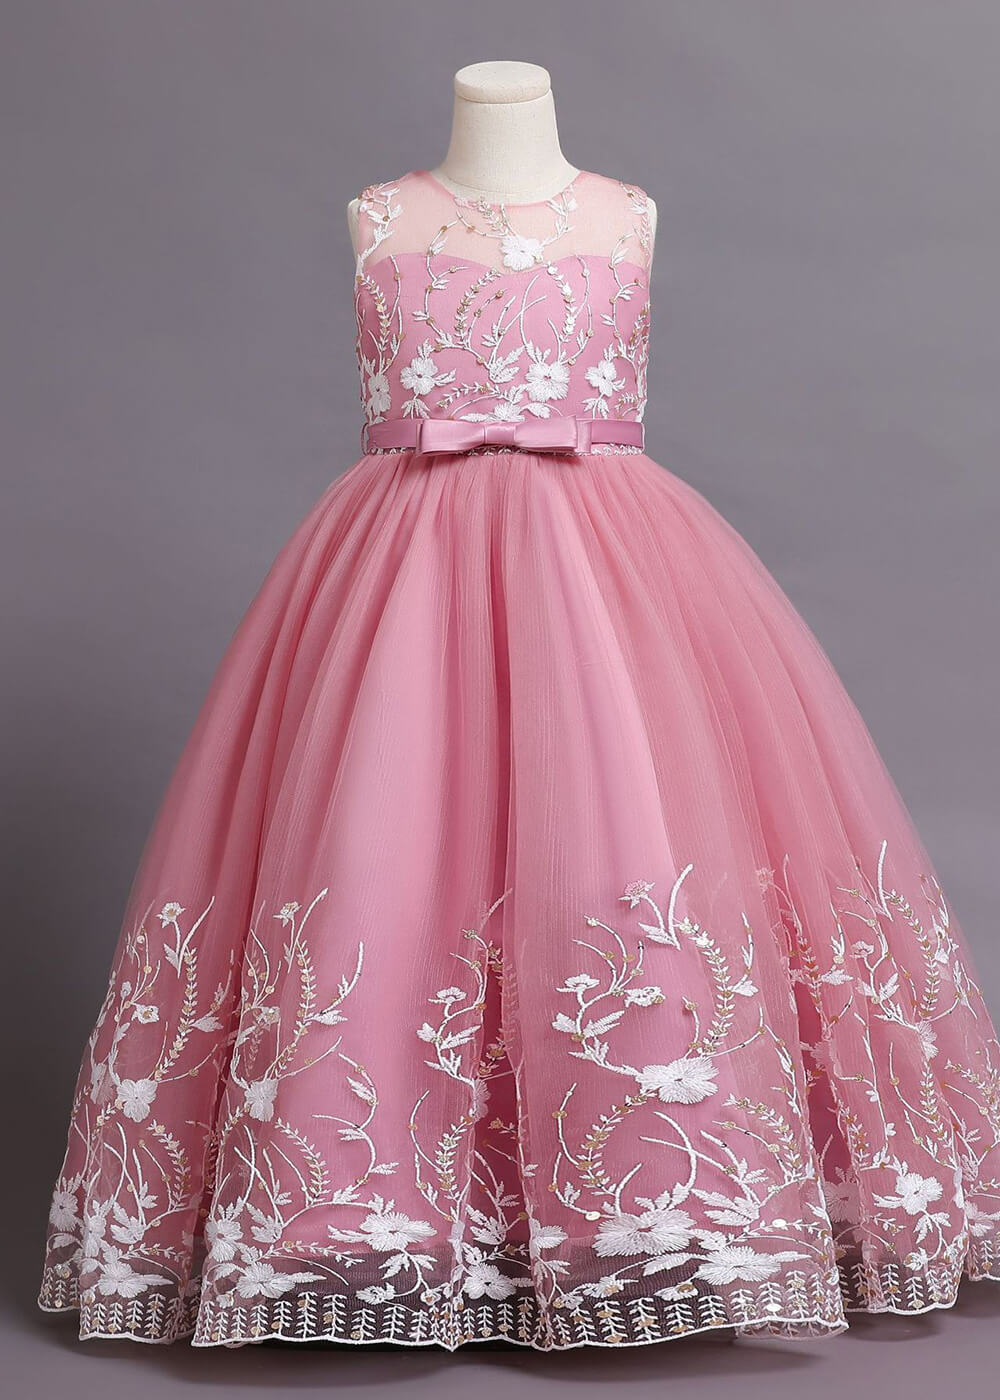 A-line Illusion A-line Tulle Appliques Flower Girl Dress With Bow